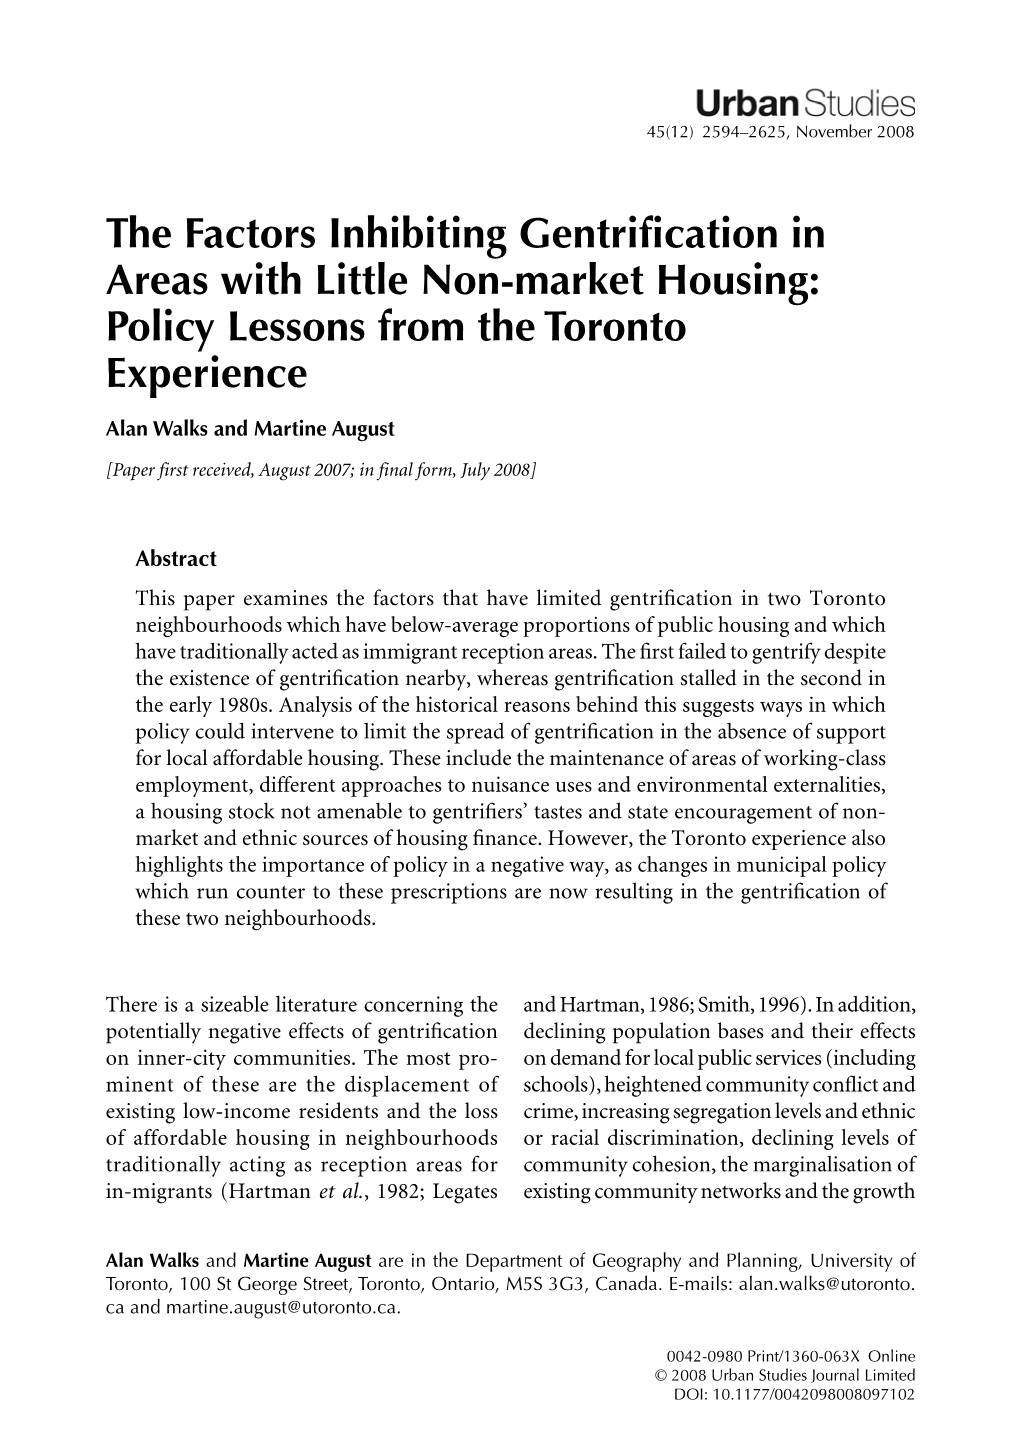 The Factors Inhibiting Gentrification in Areas with Little Non-Market Housing: Policy Lessons from the Toronto Experience